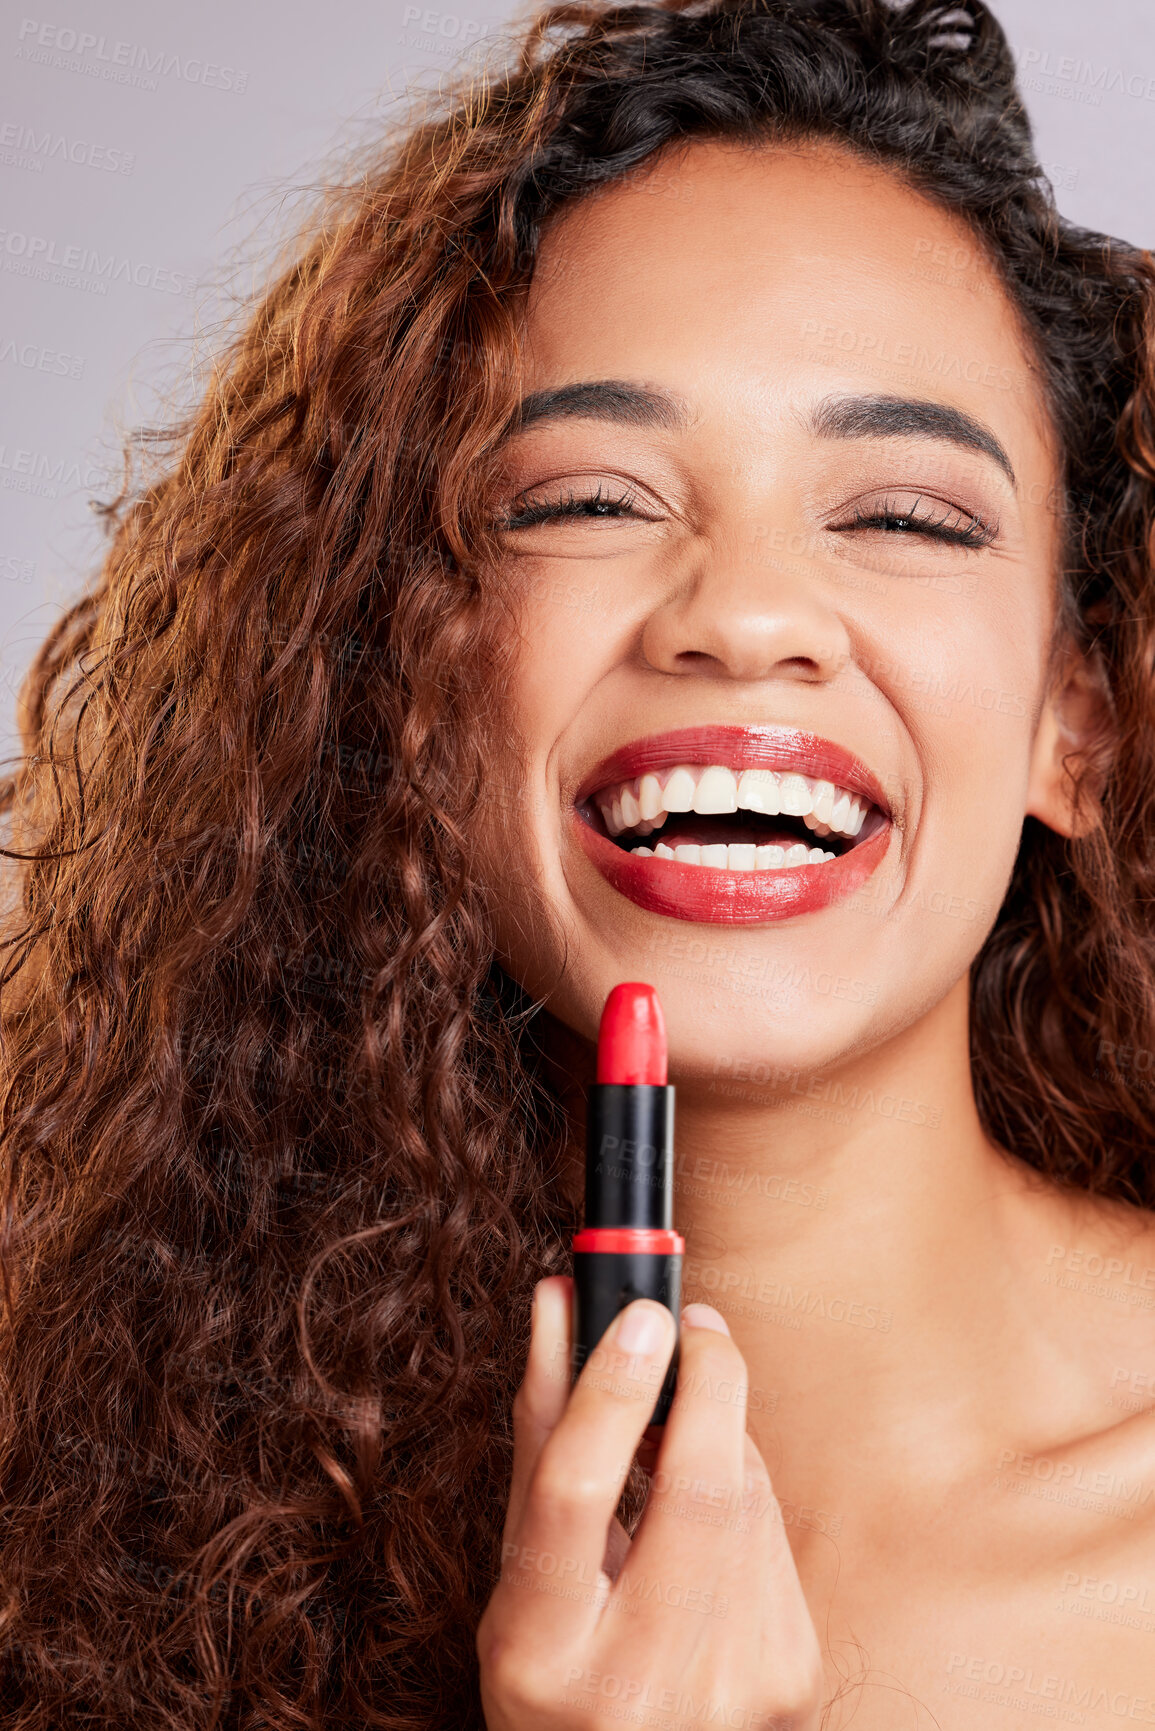 Buy stock photo Shot of a young woman applying lipstick against a grey background